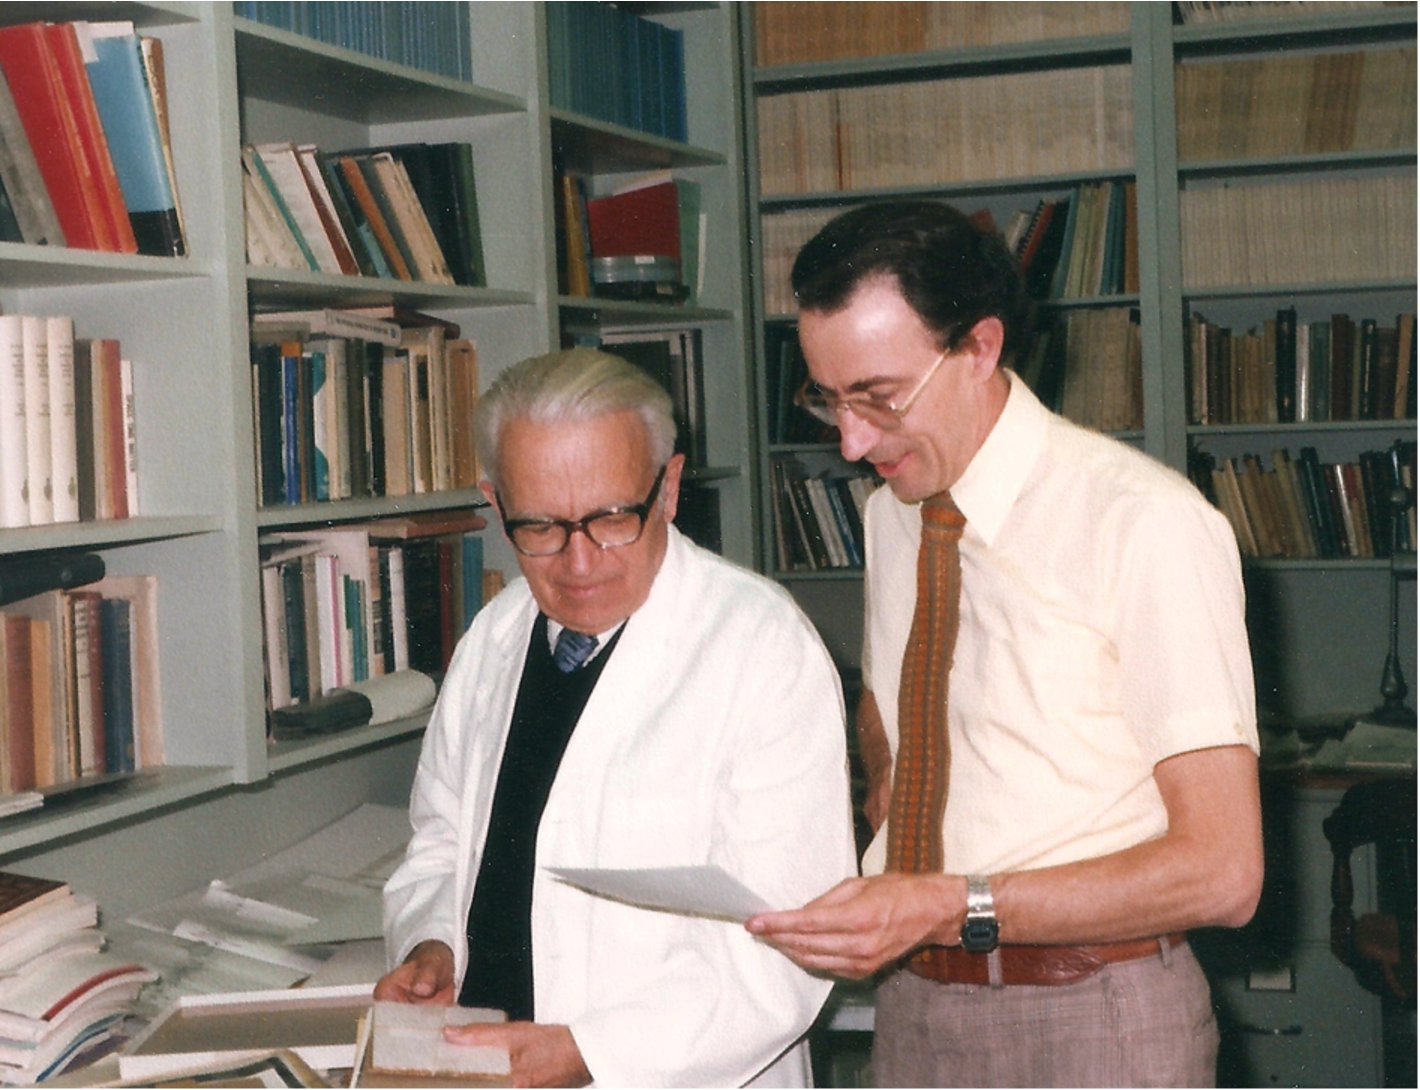 Photograph of Henry Mantsch (on the right) with the Nobel Laureate Gerhard Herzberg at the NRC in Ottawa (photograph kindly provided by Henry Mantsch).